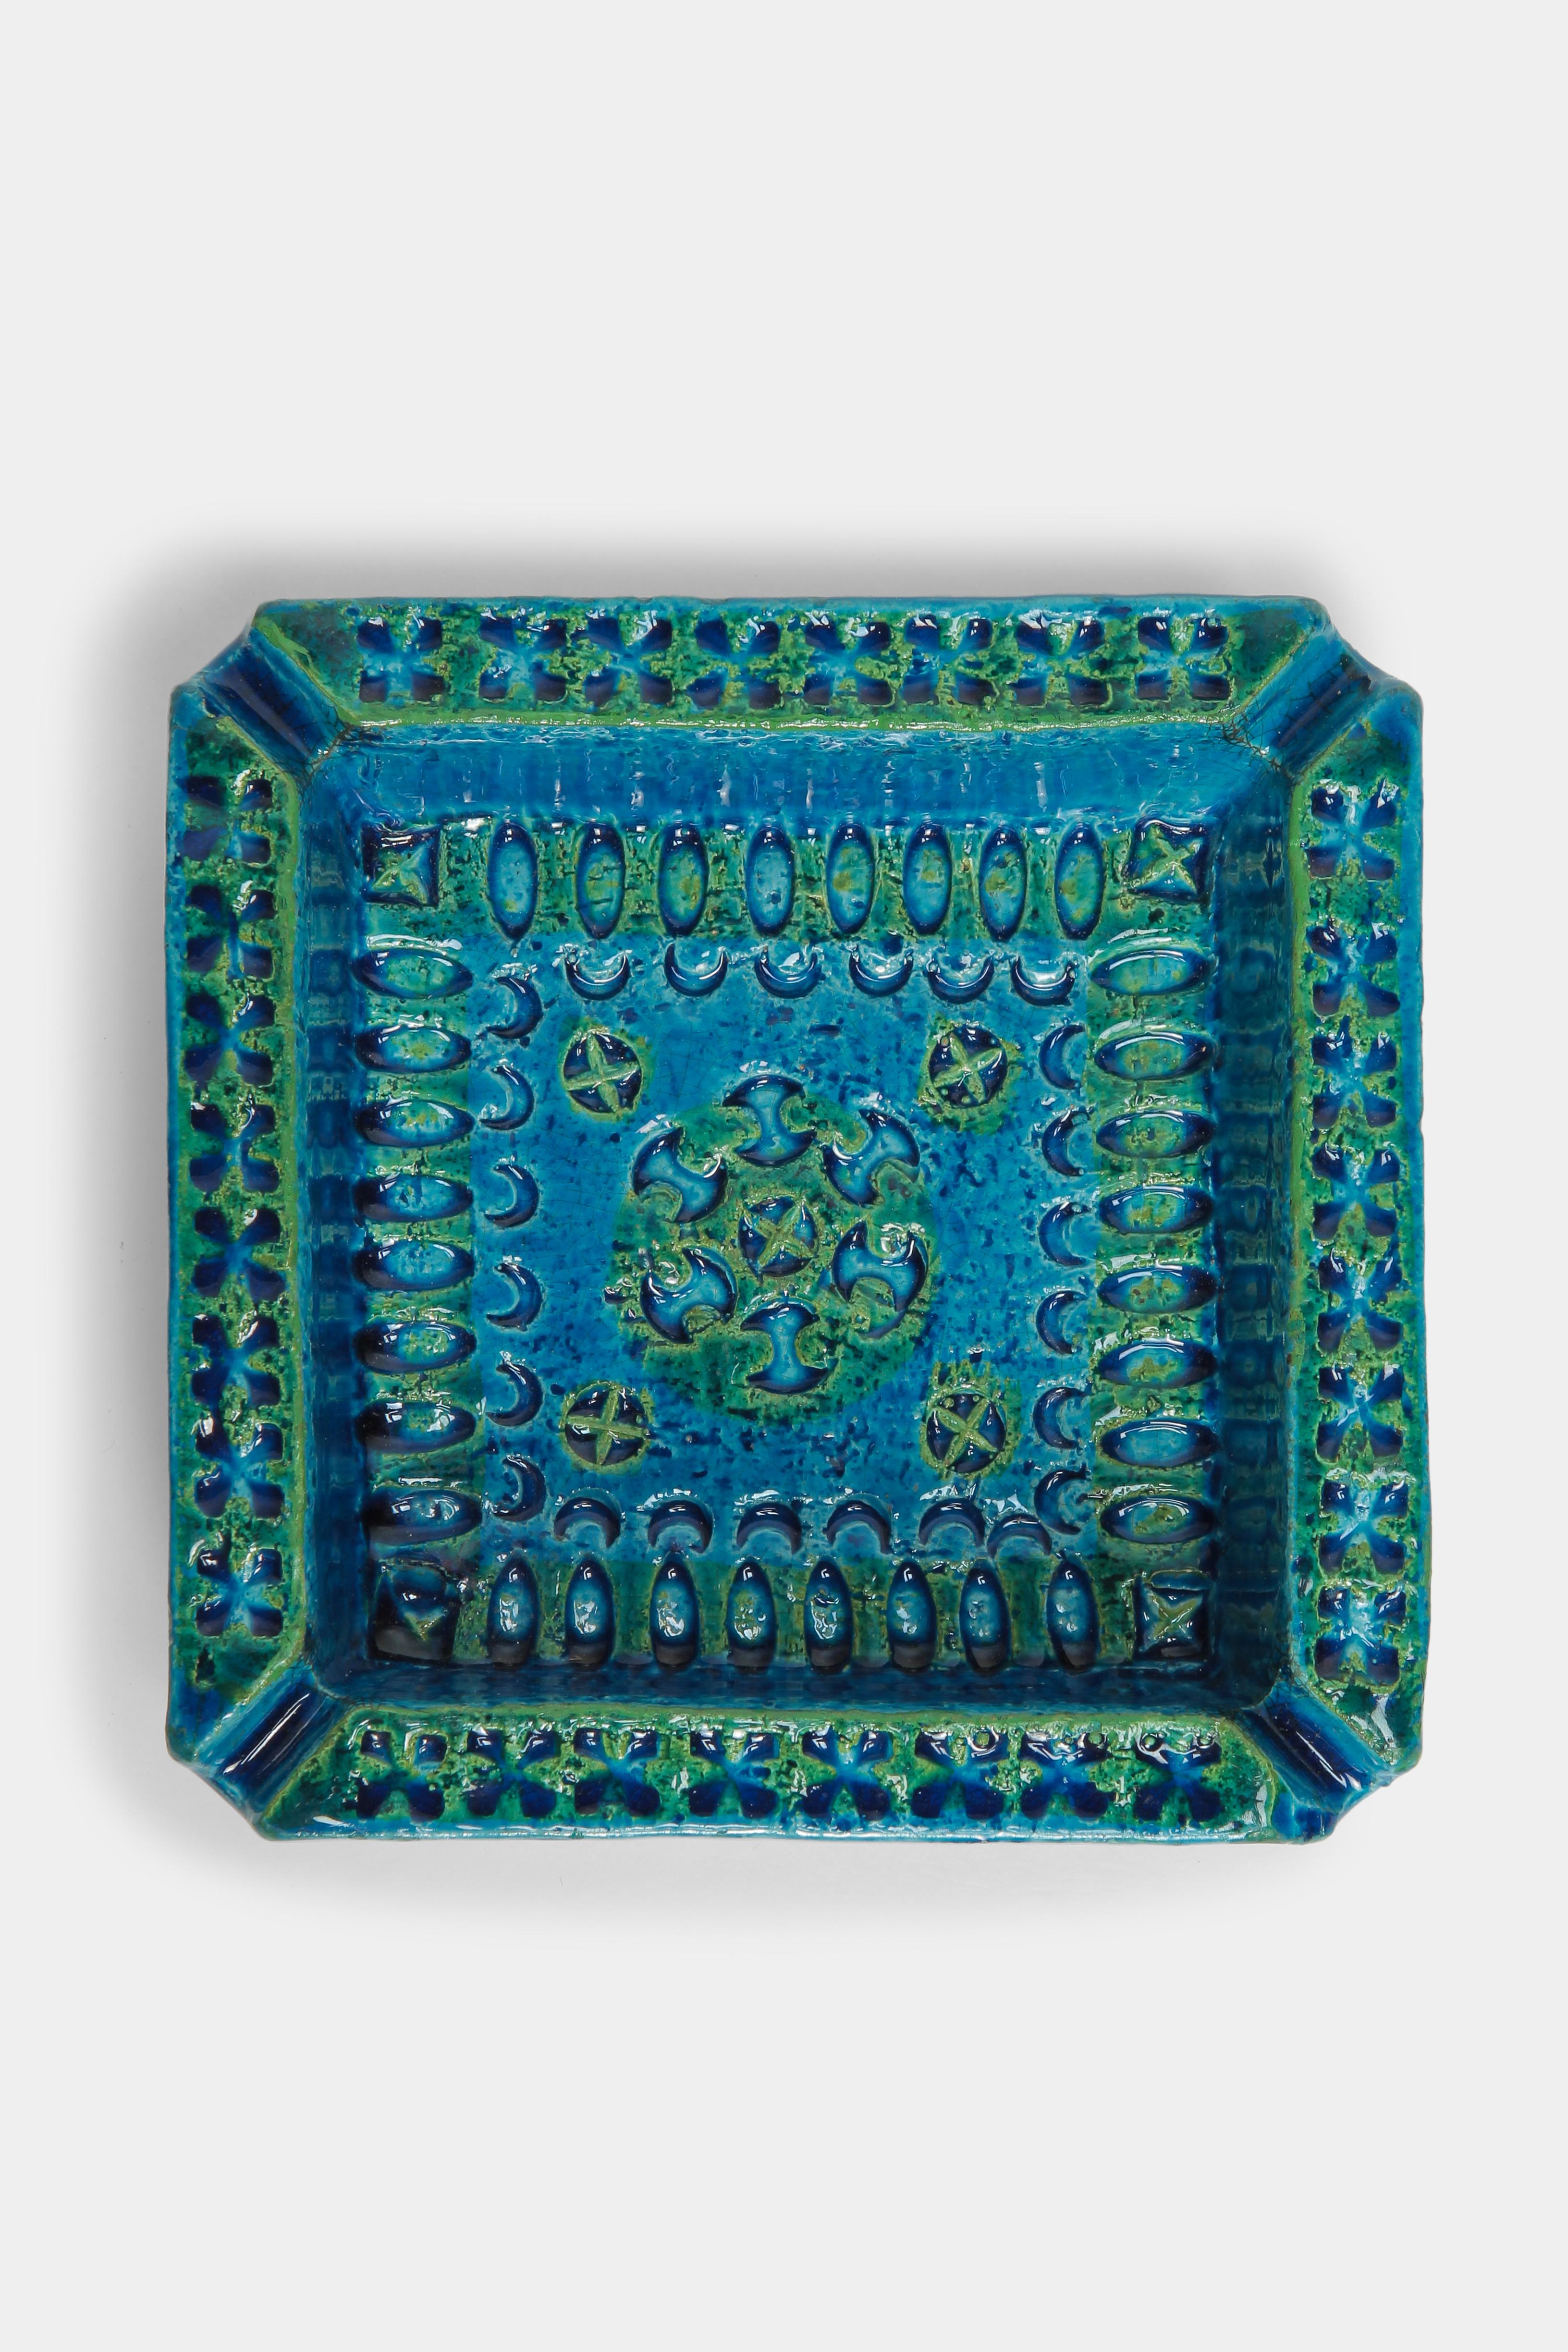 Beautiful blue and green coloured ashtray from the production series Rimini Blu by Aldo Londi. The ashtray way produced by Bitossi Italy in the 1970s and is in a very good condition.